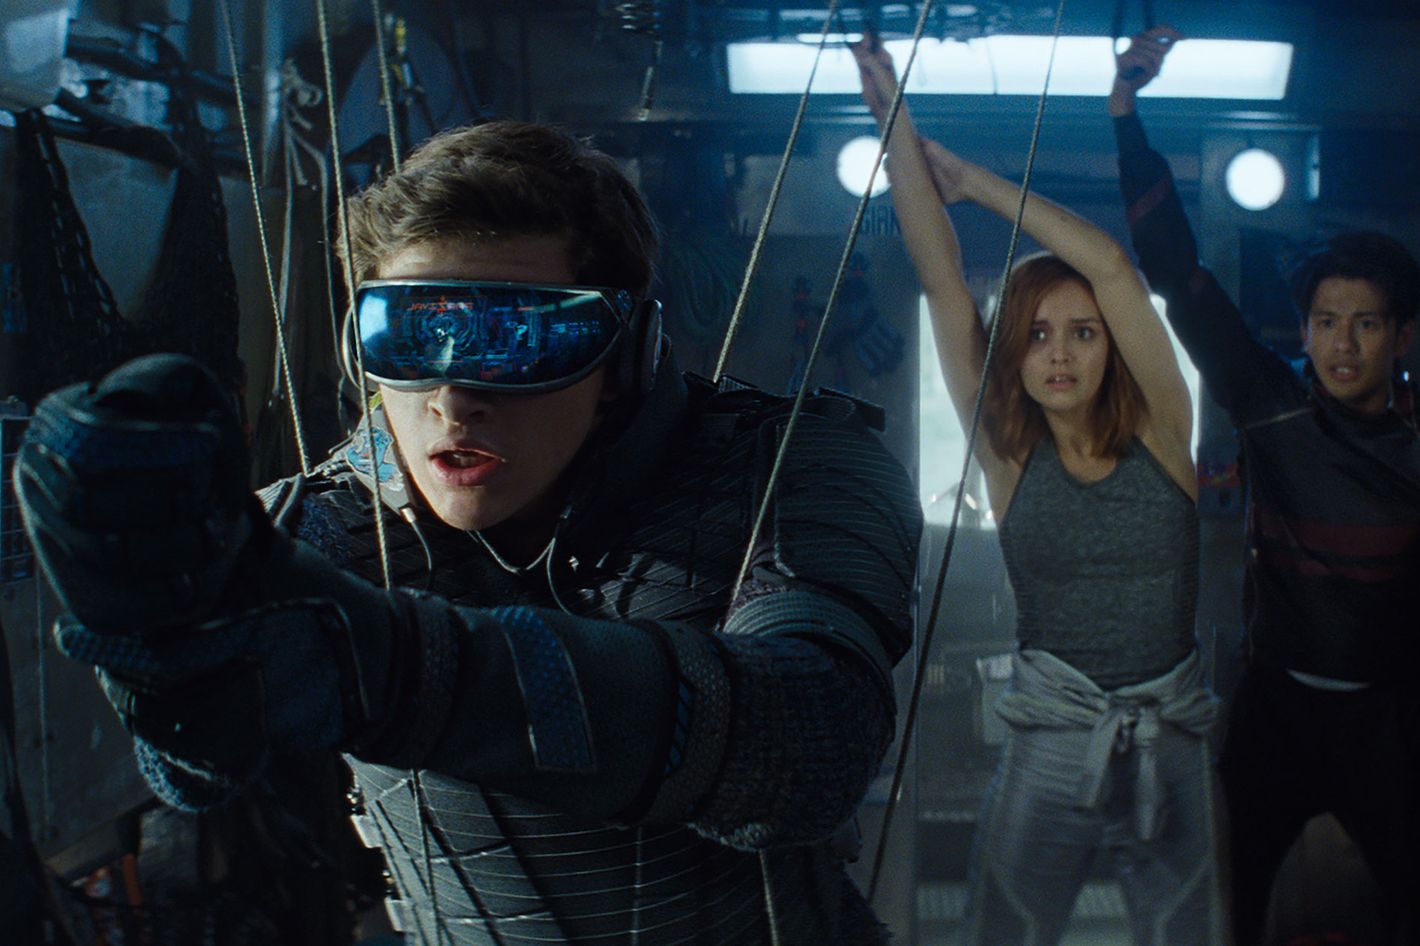 Have You Seen 'Ready Player One'? Let's Talk Spoilers - The New York Times